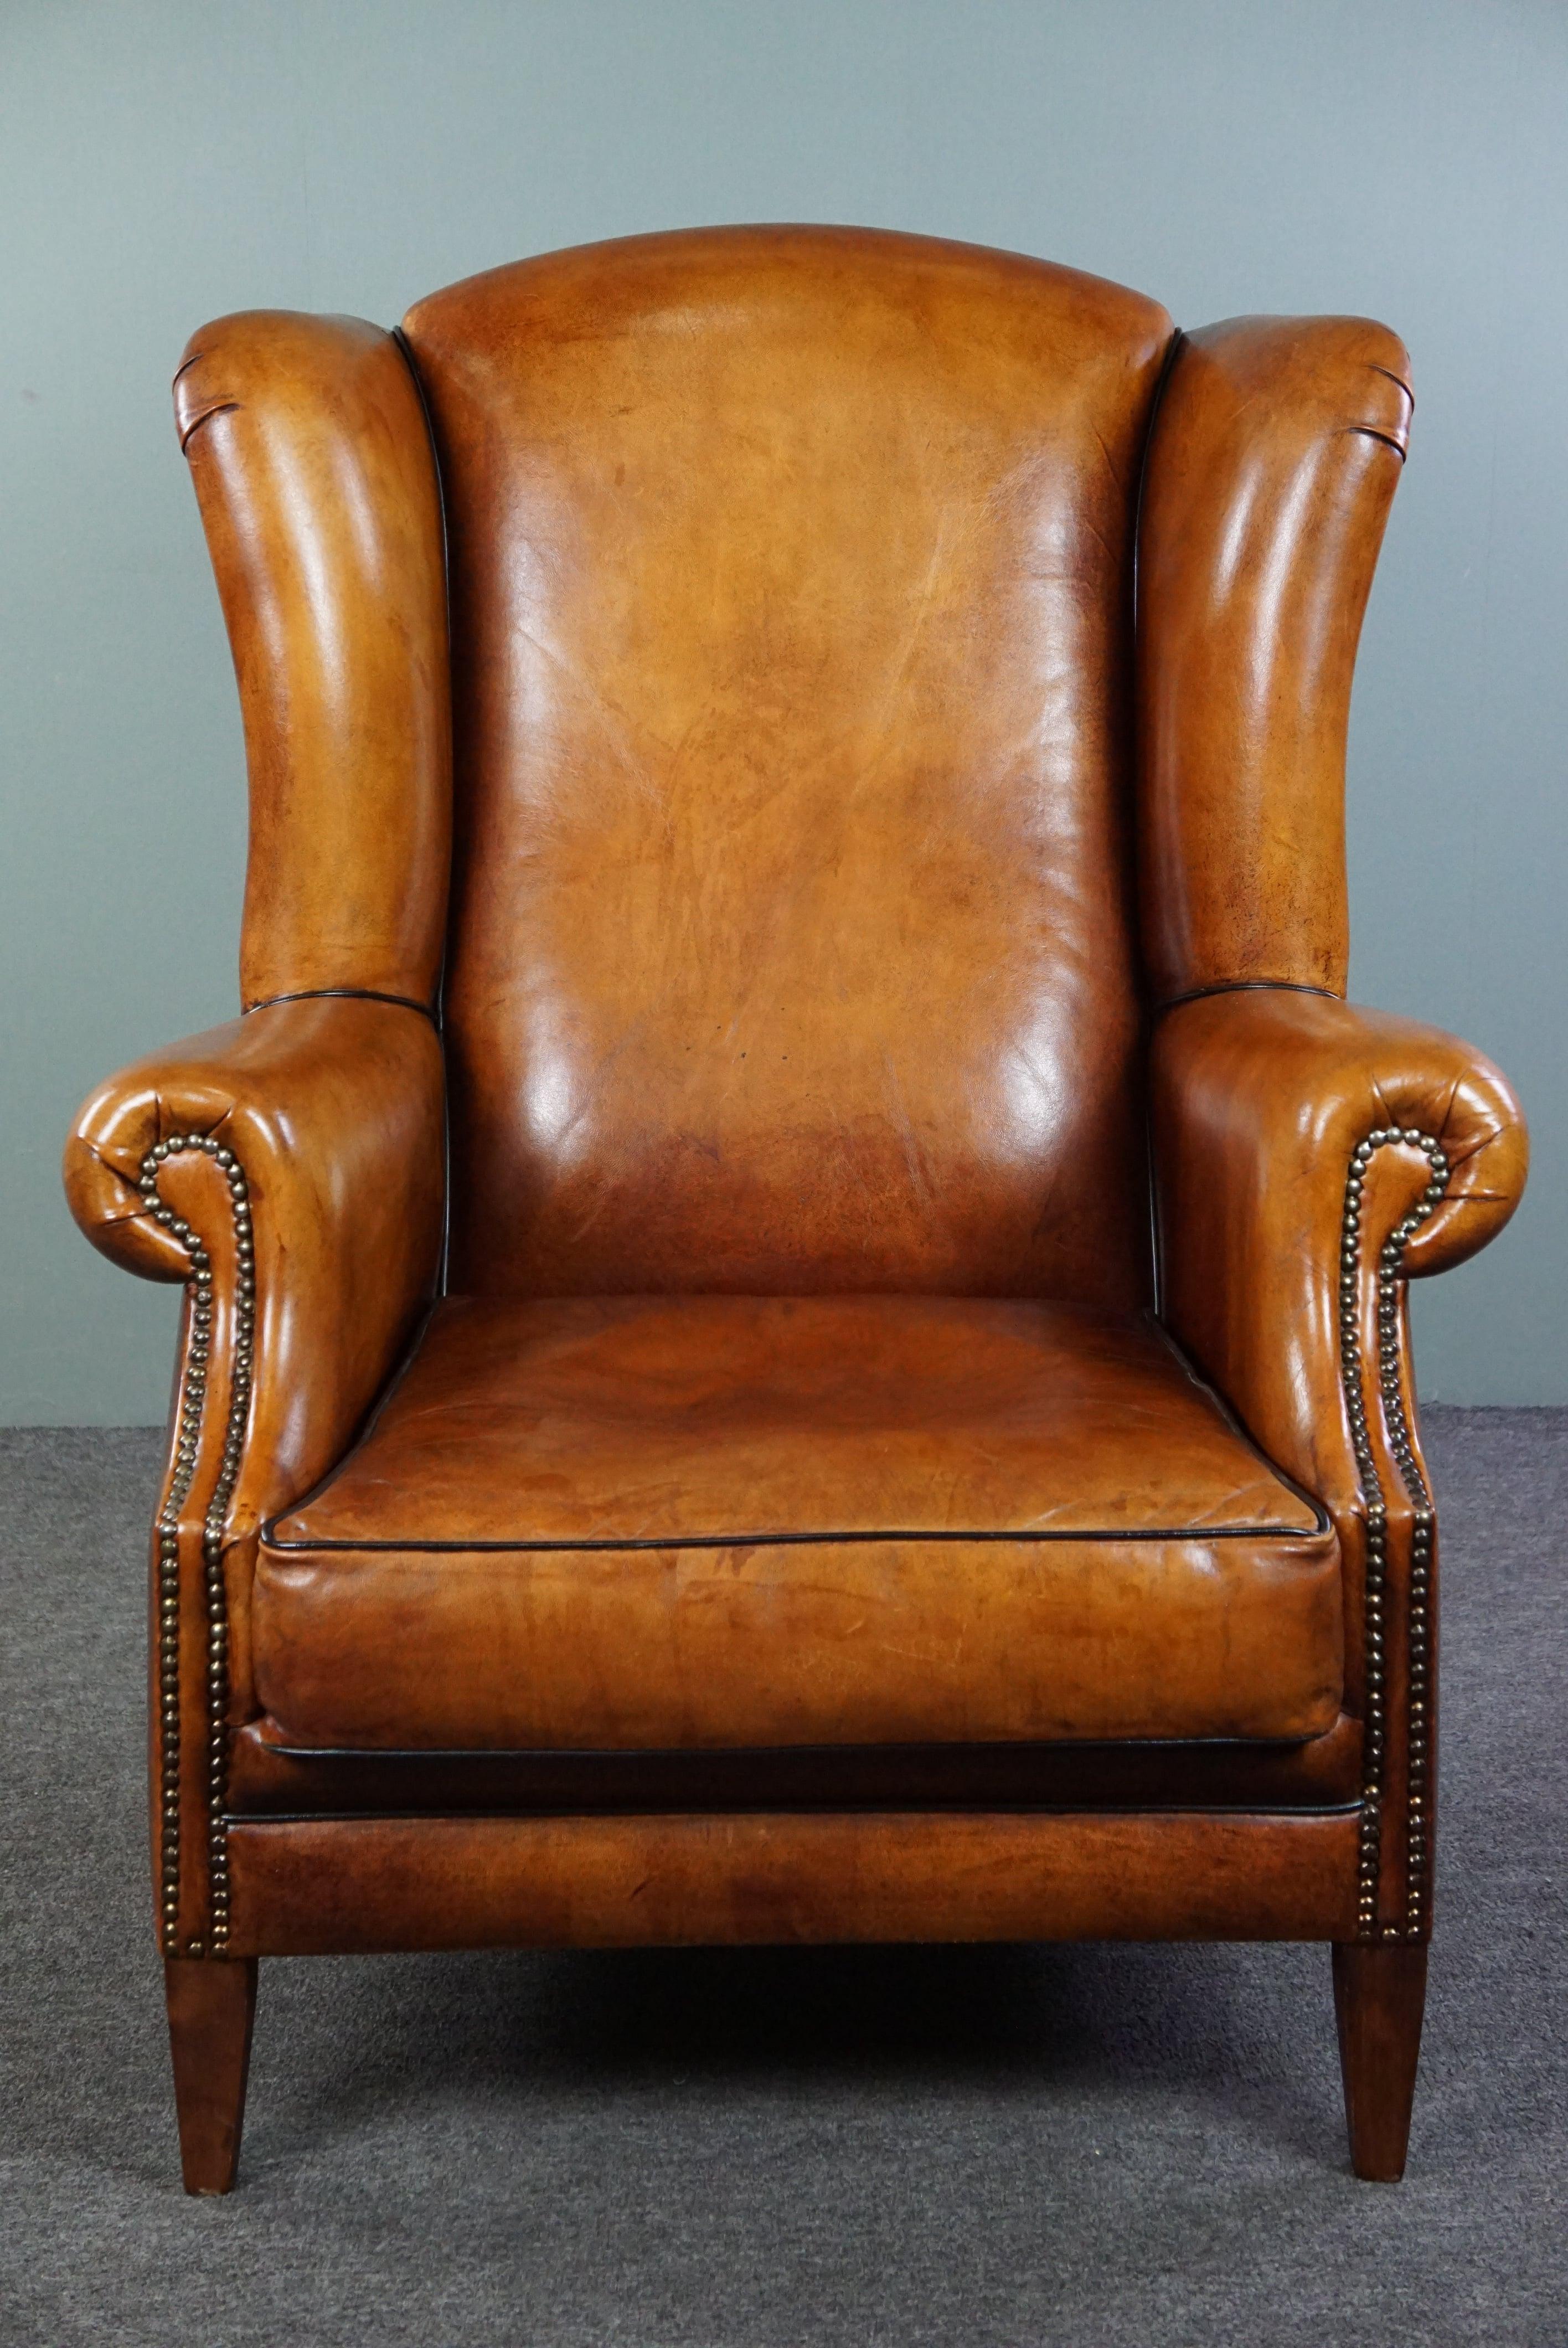 Offered is this very warm sheepskin chair, finished all around with black piping, giving the chair both a timeless and chic look. The minimalist design enhances the incredibly beautiful sheepskin leather. The seat of this chair is very comfortable,